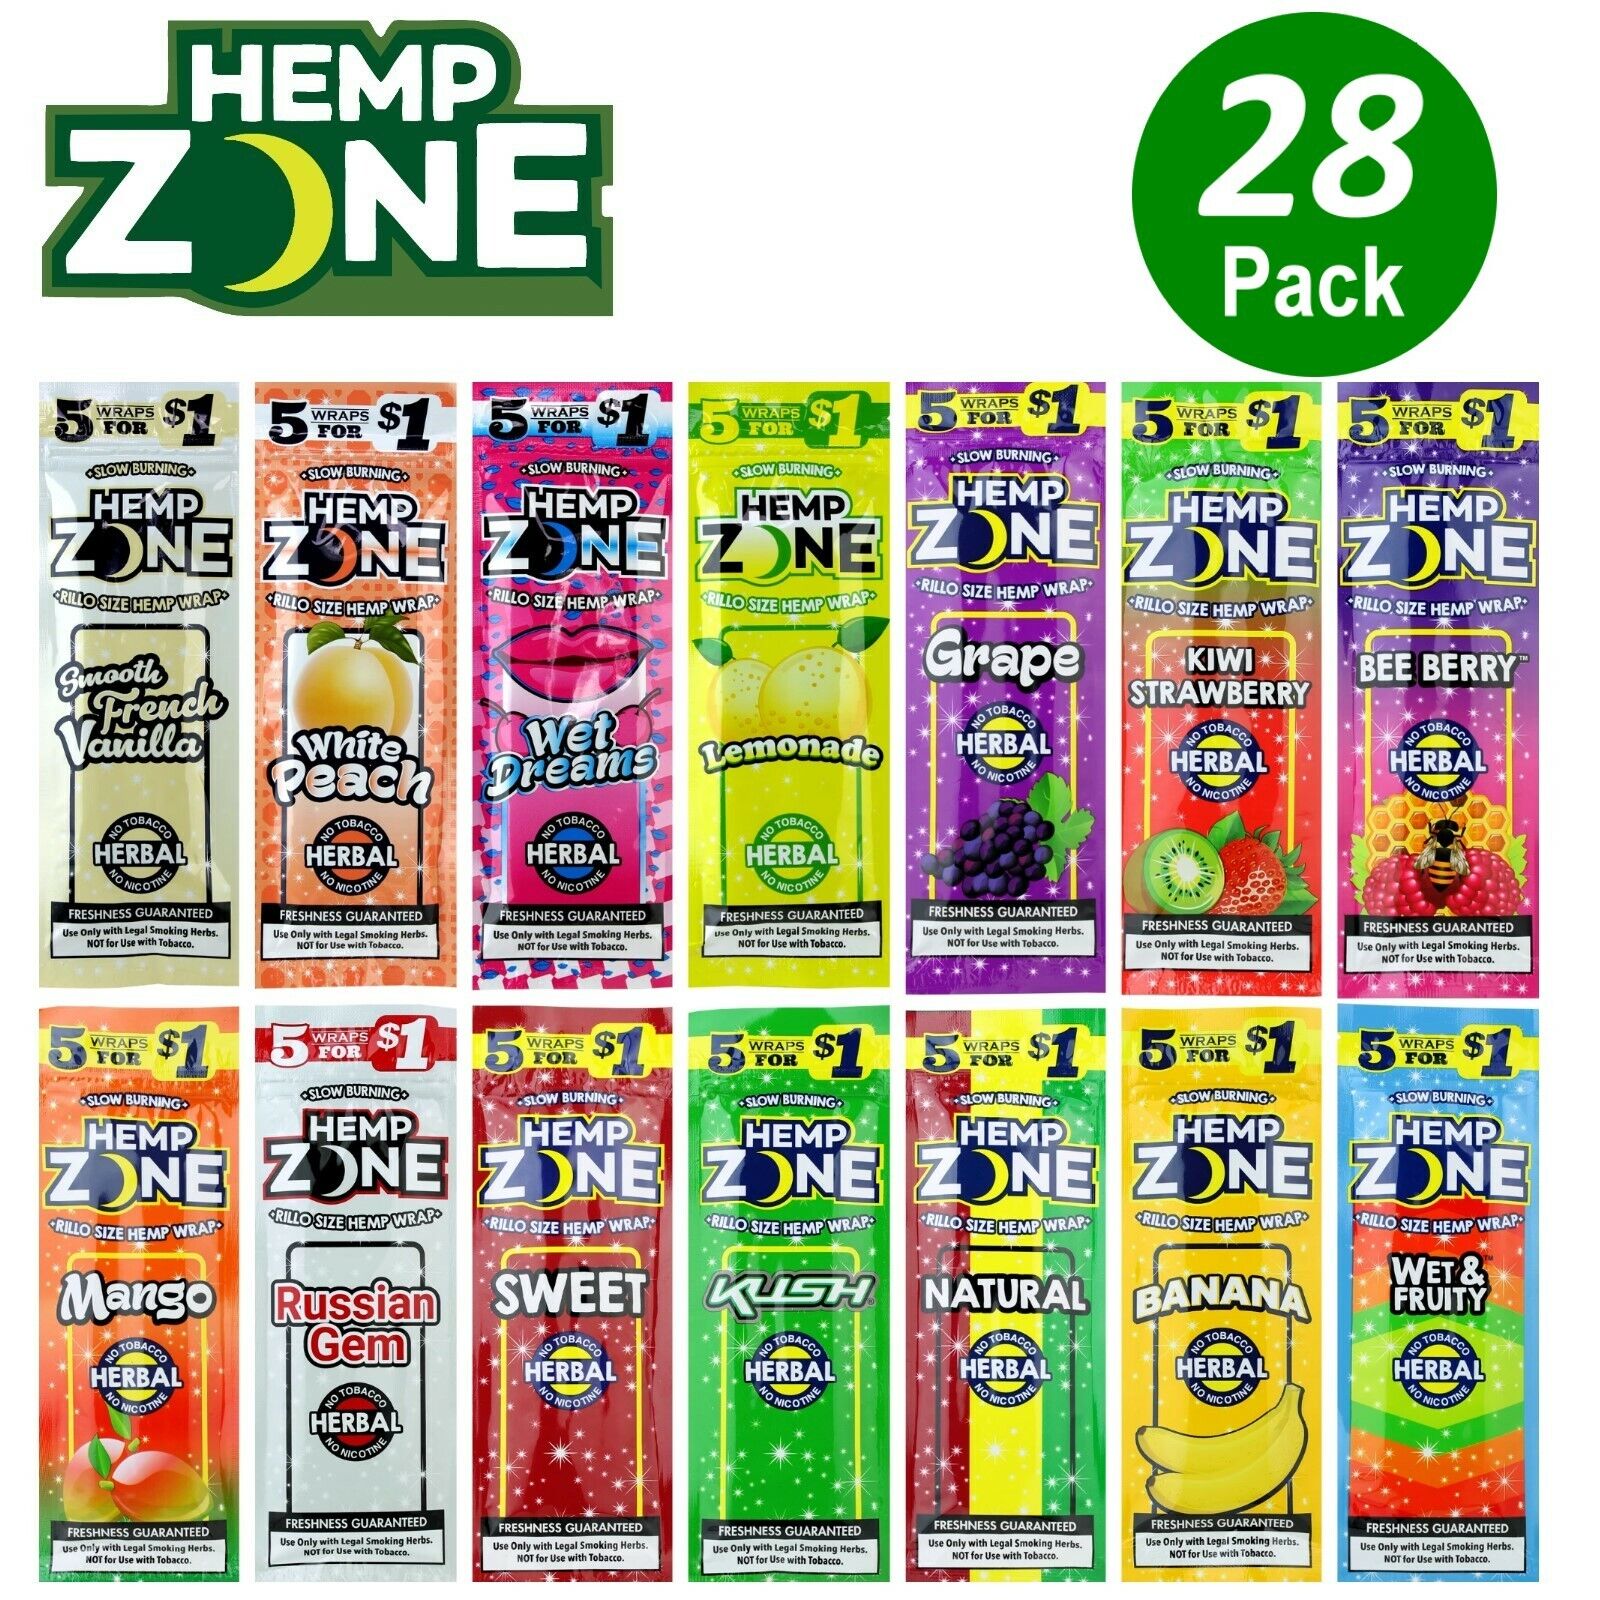 H. Zone Organic Wrap Variety Pack 28 Pouches, 5 Per Pouch - 140 Wraps Total